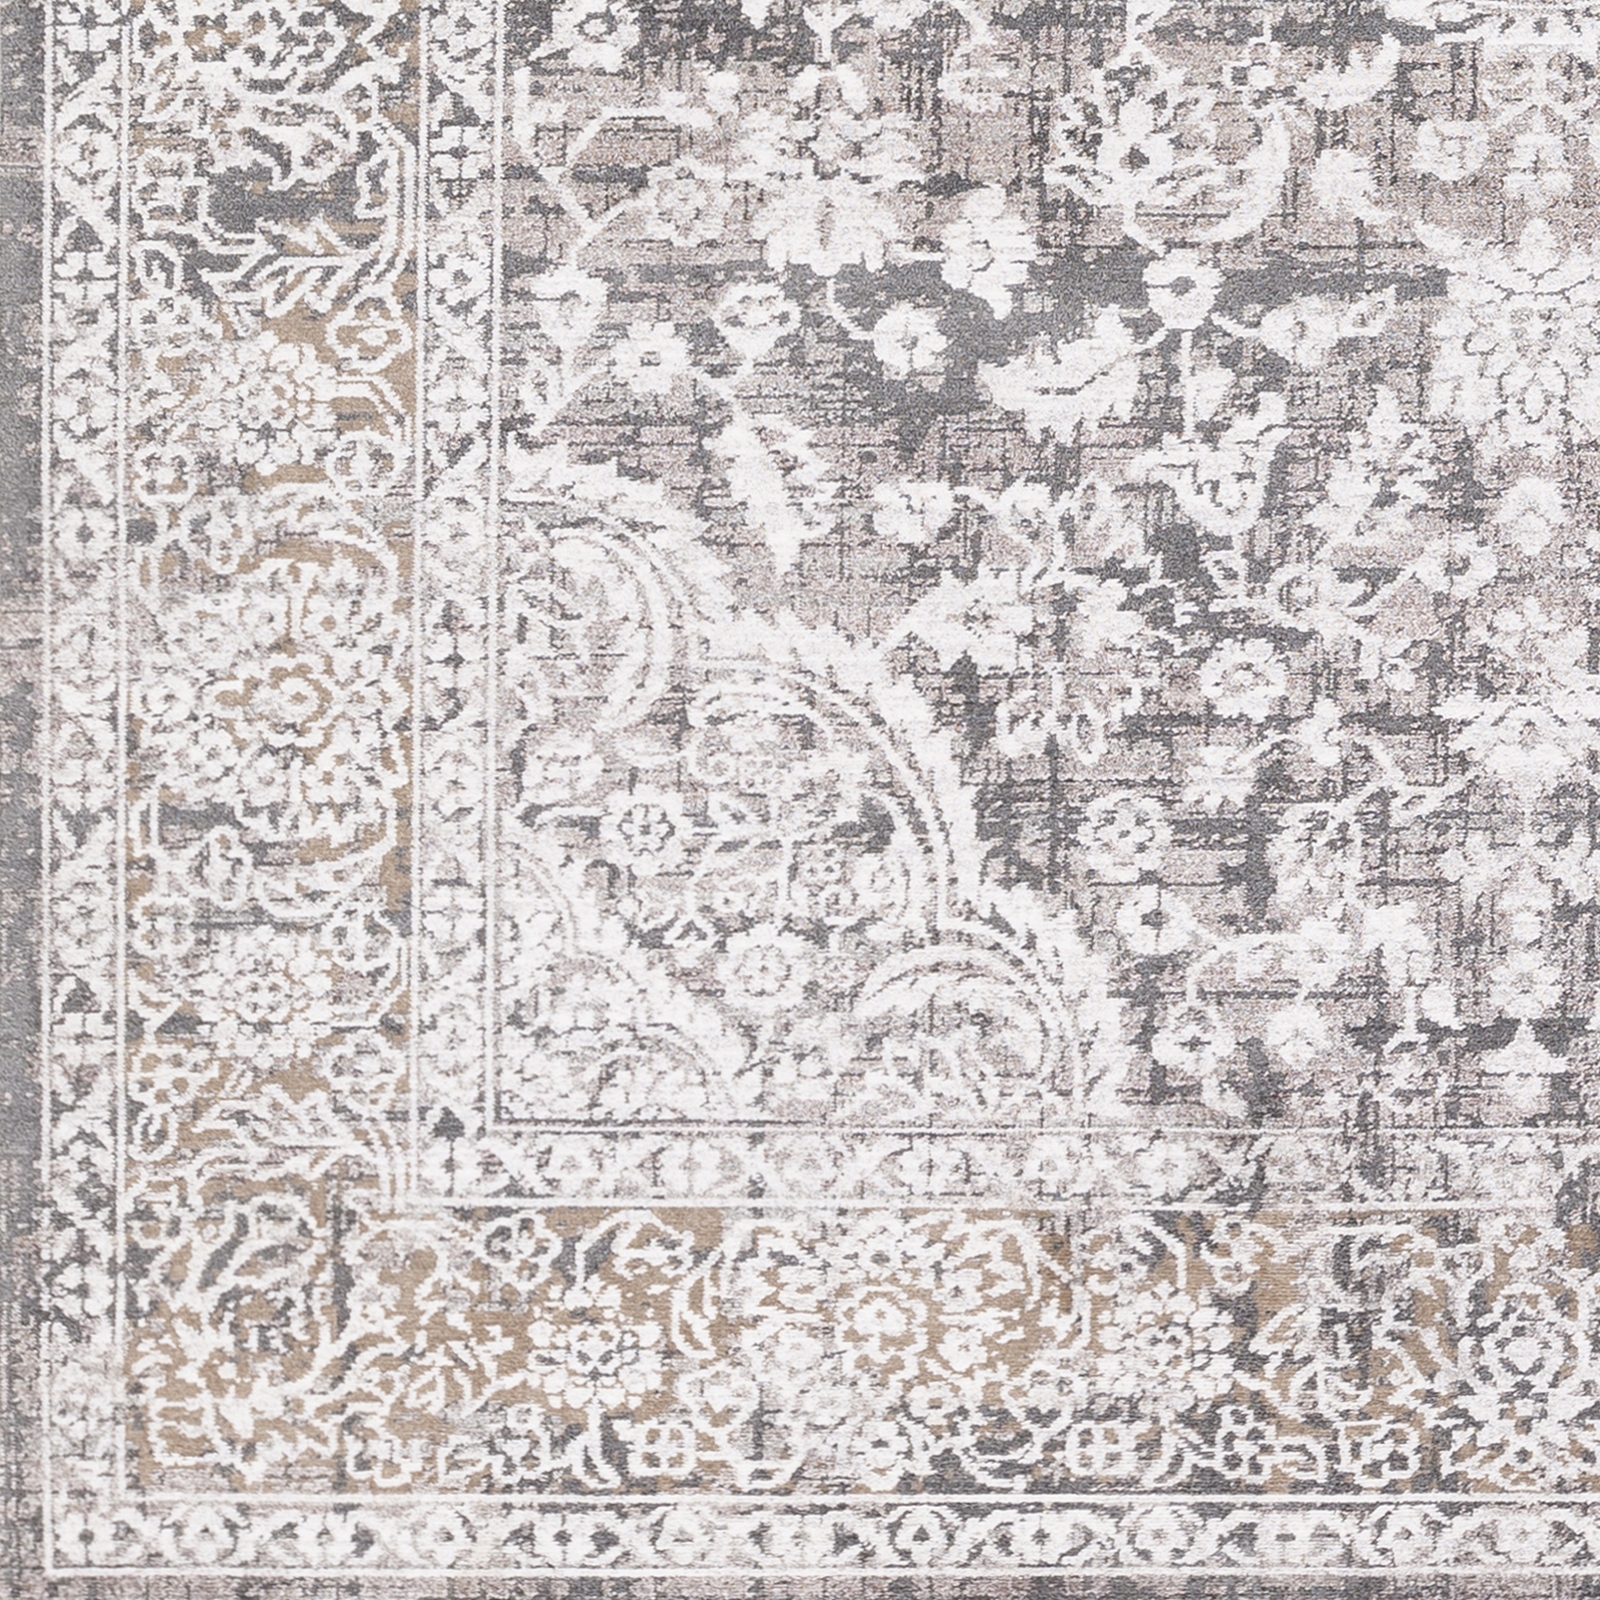 Couture Rug, 6'7" x 9'6" - Image 1